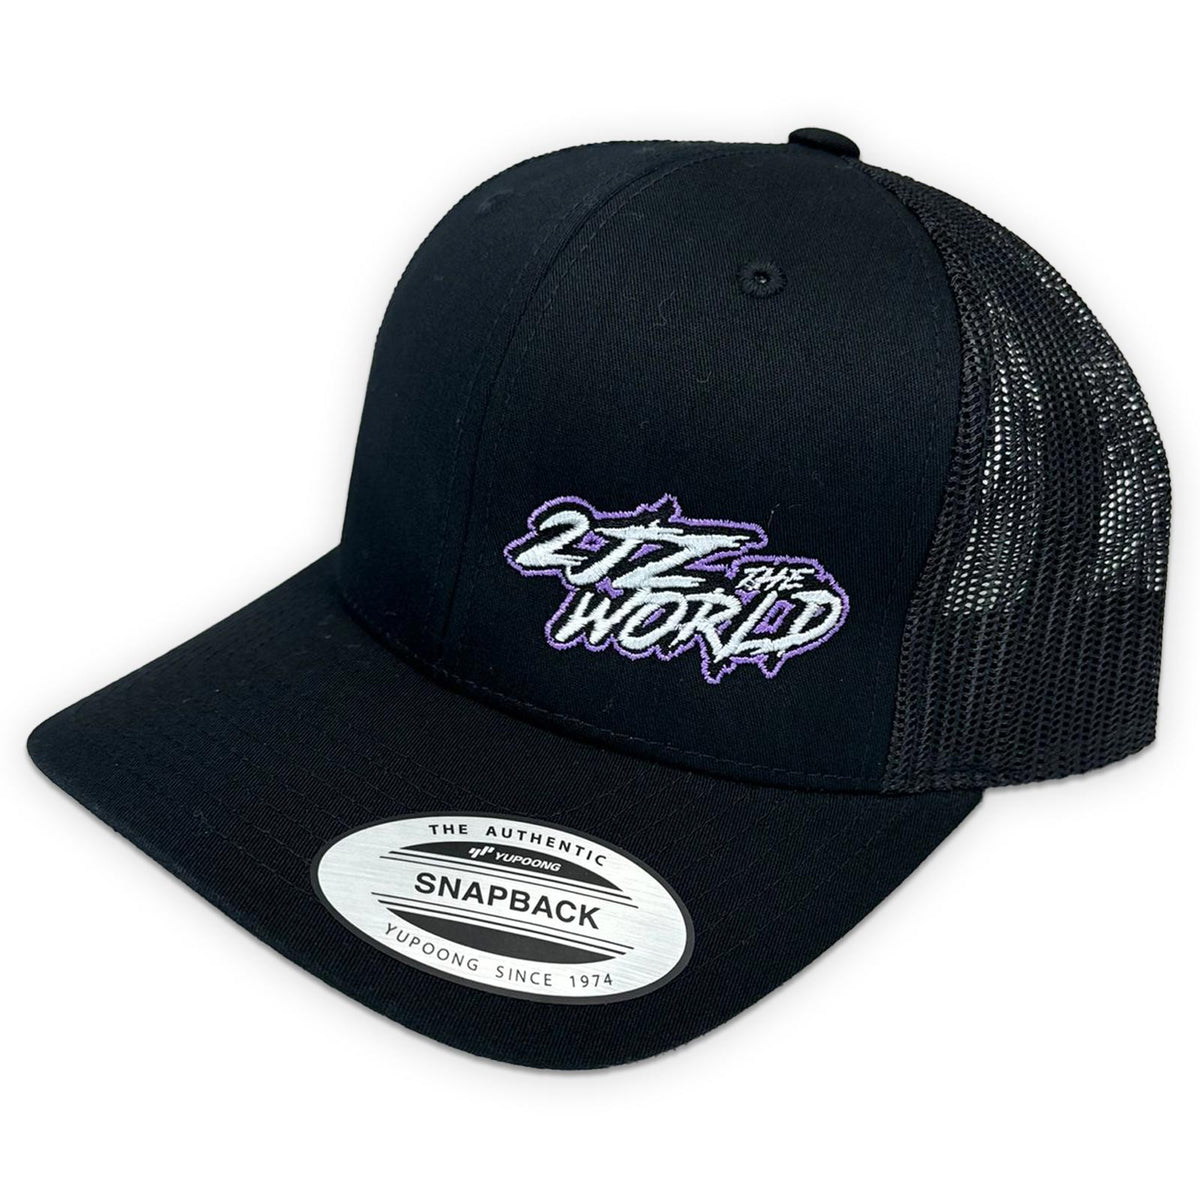 2JZ THE WORLD Hat - That Racing Channel